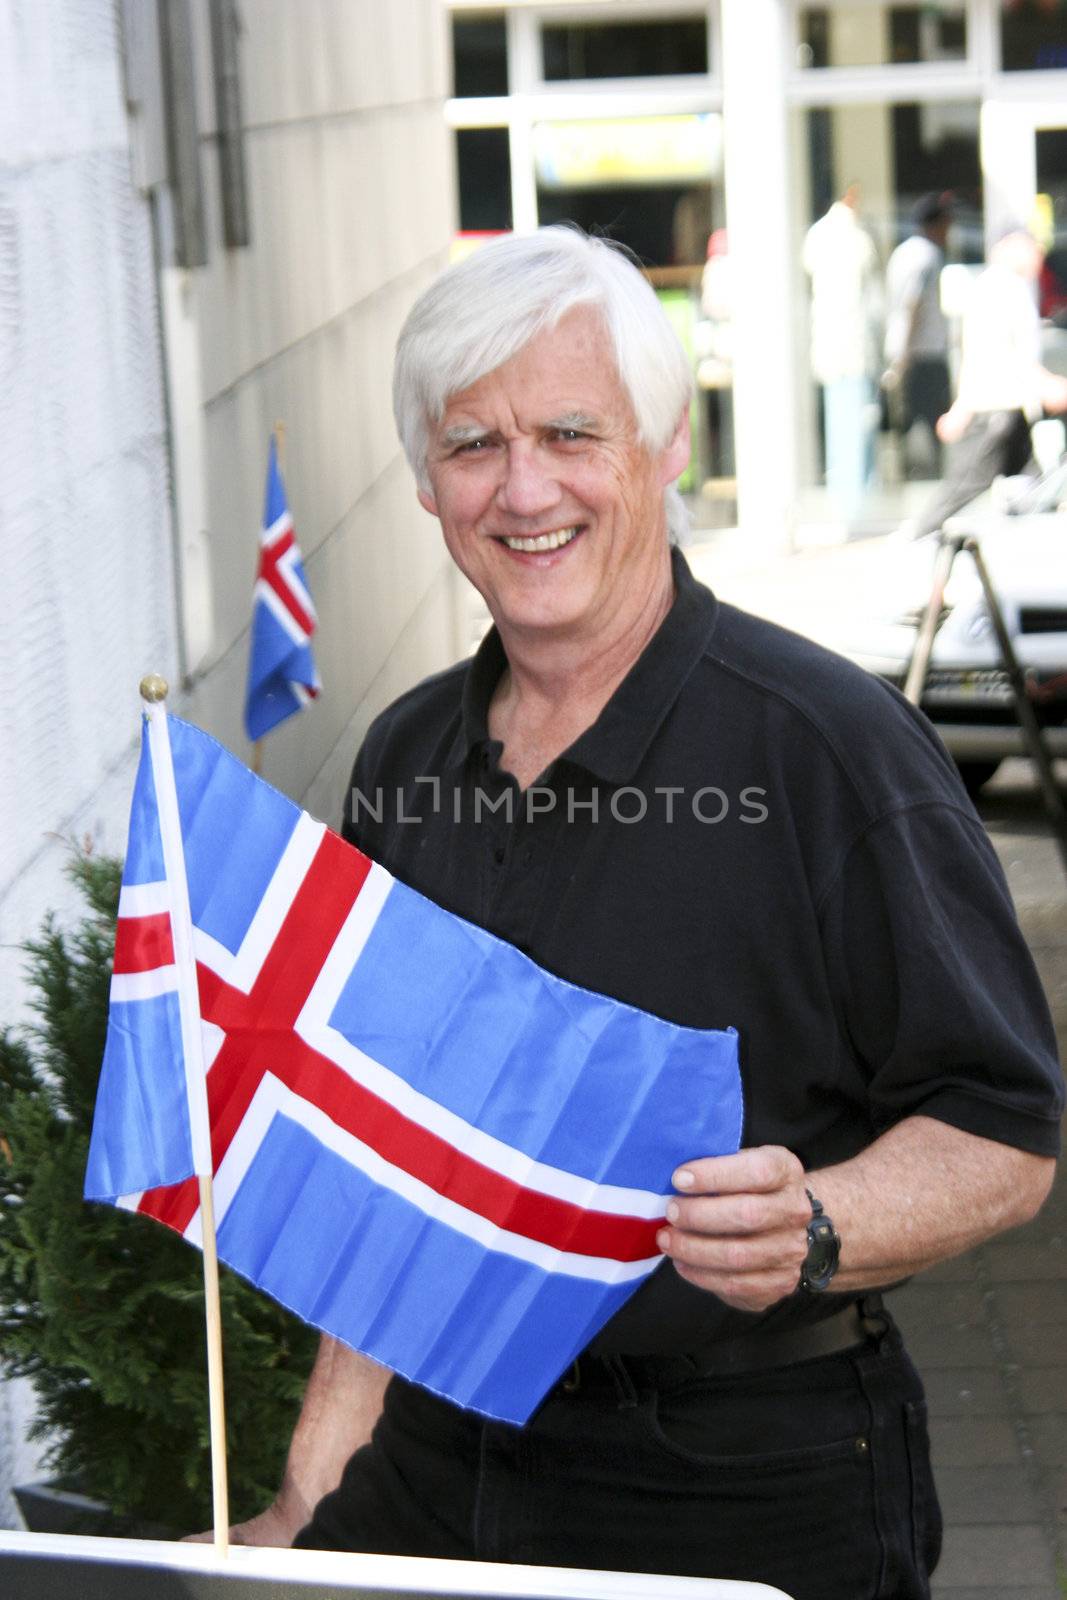 Mature, senior male with table top copy of Iceland's national flag in Reykjavik, Iceland